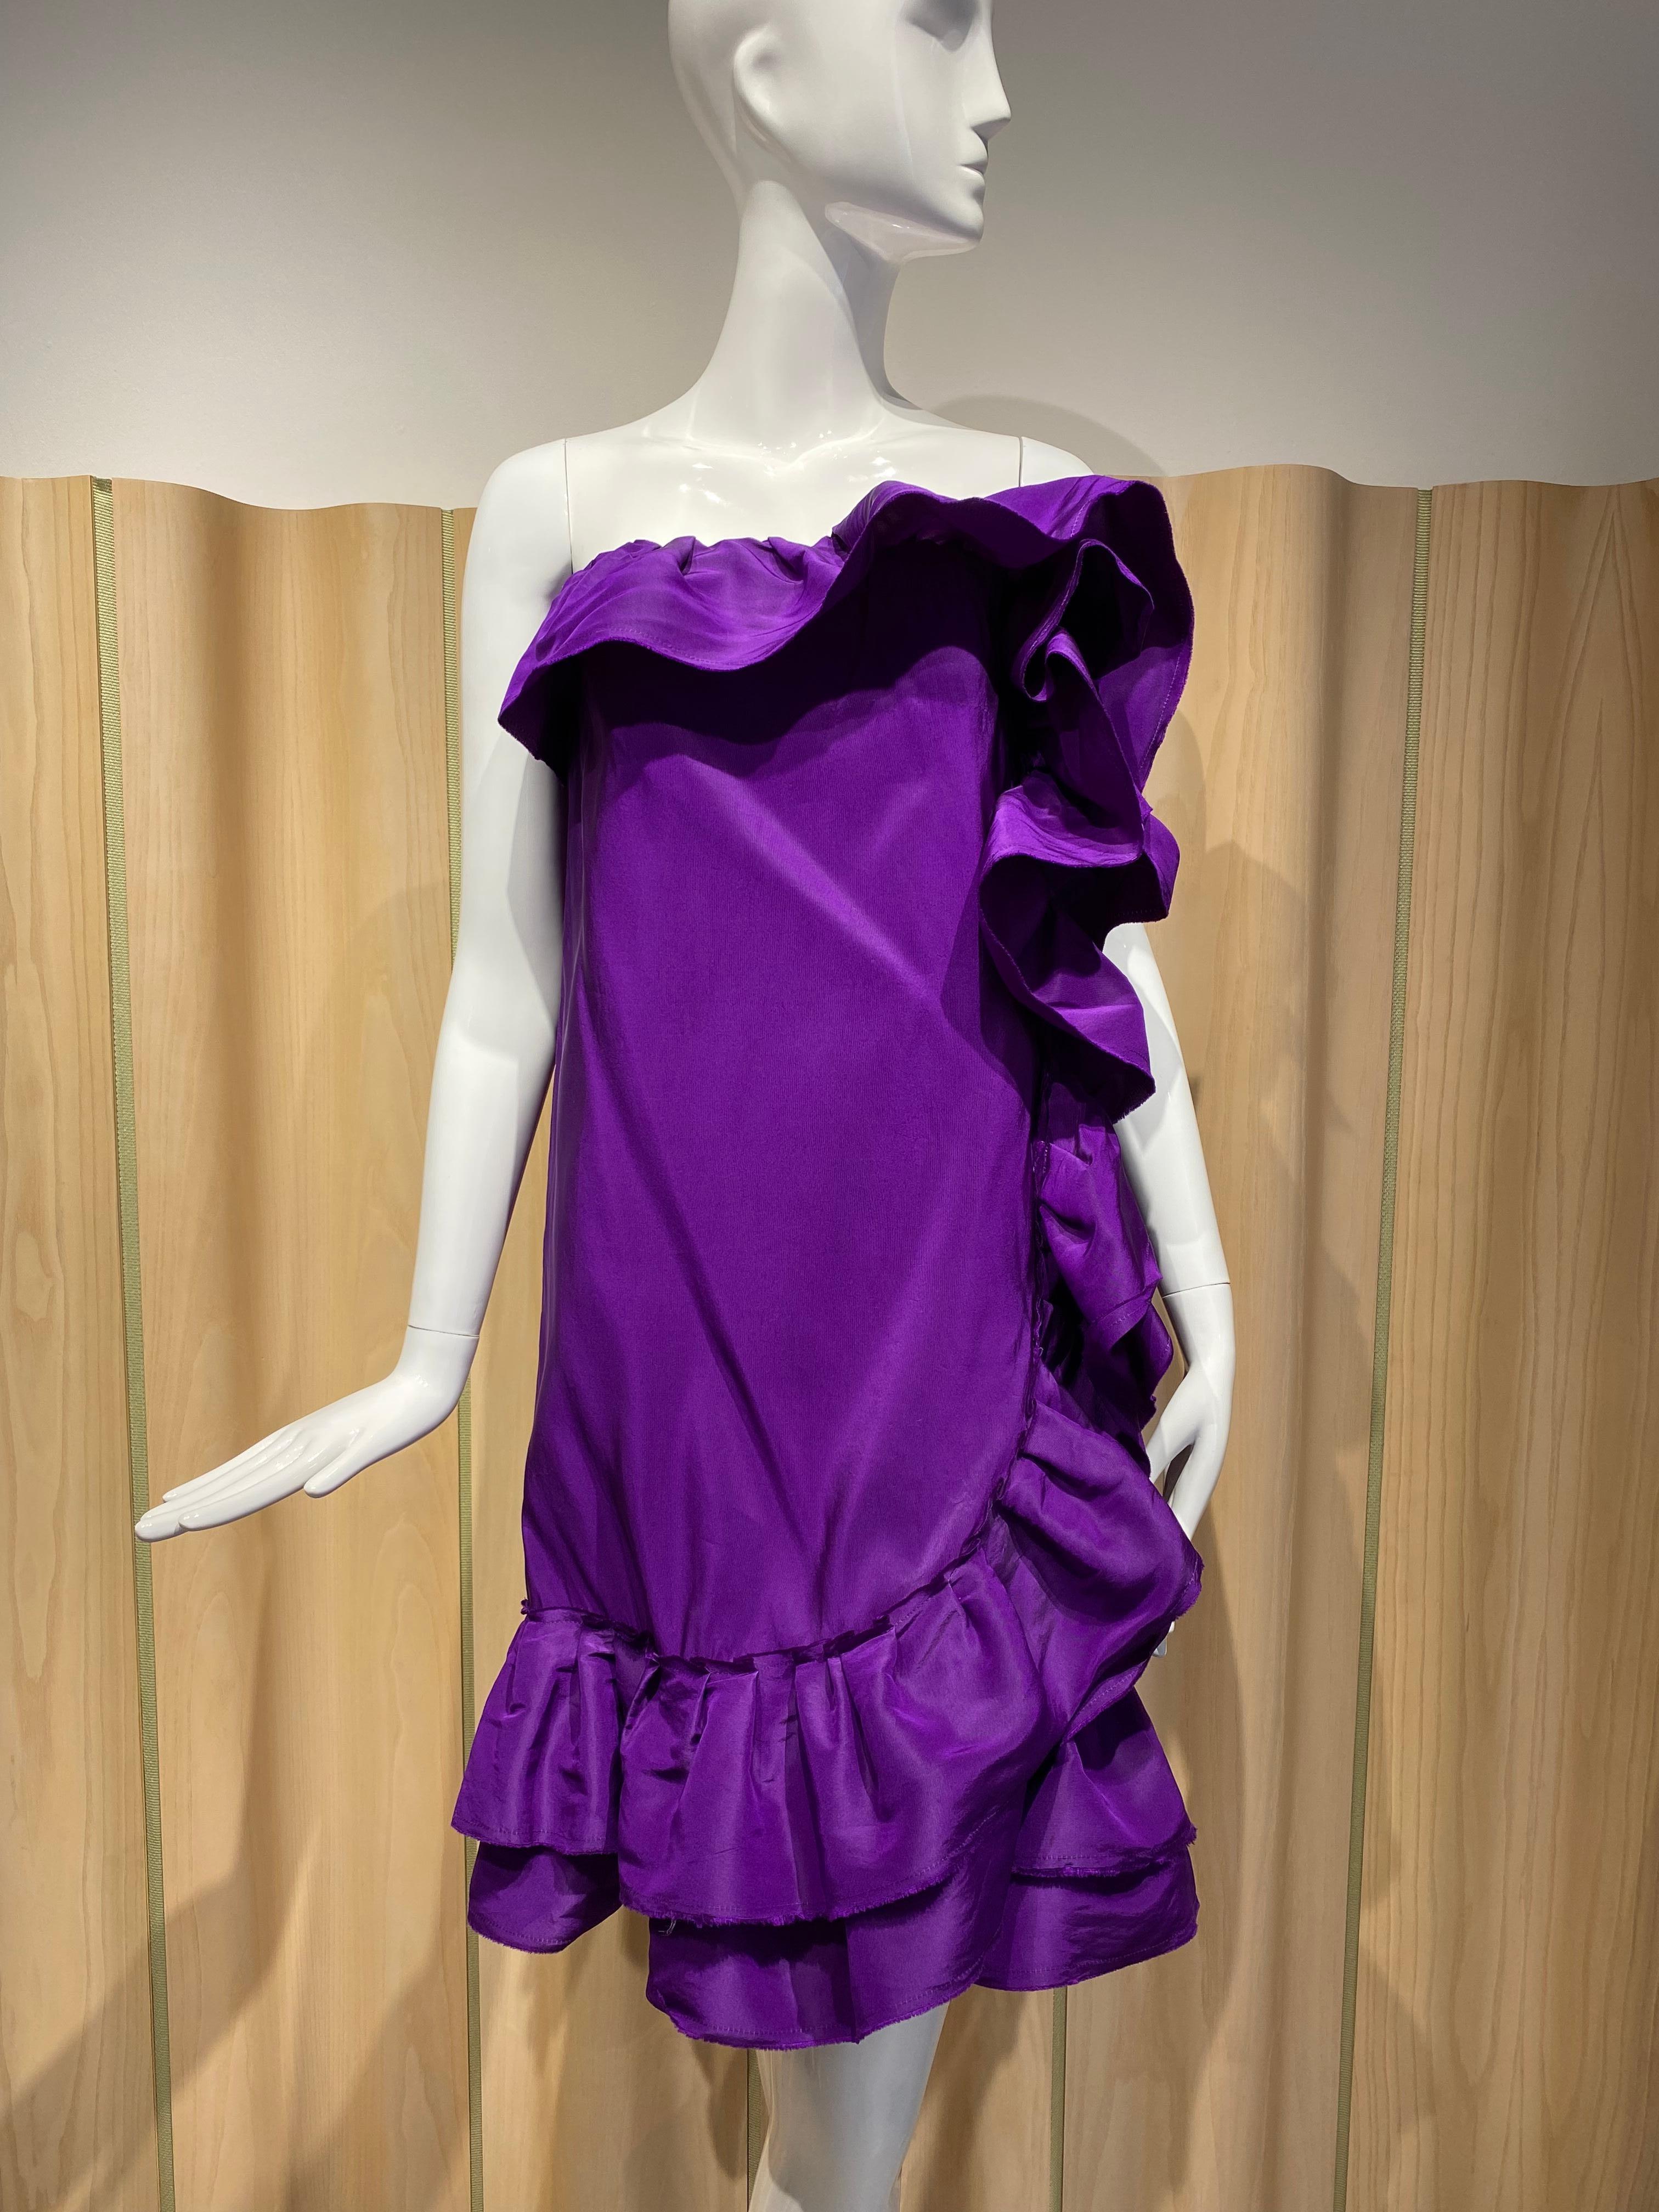 LANVIN by Alber Elbaz Purple Silk Strapless Cocktail Dress In Good Condition For Sale In Beverly Hills, CA